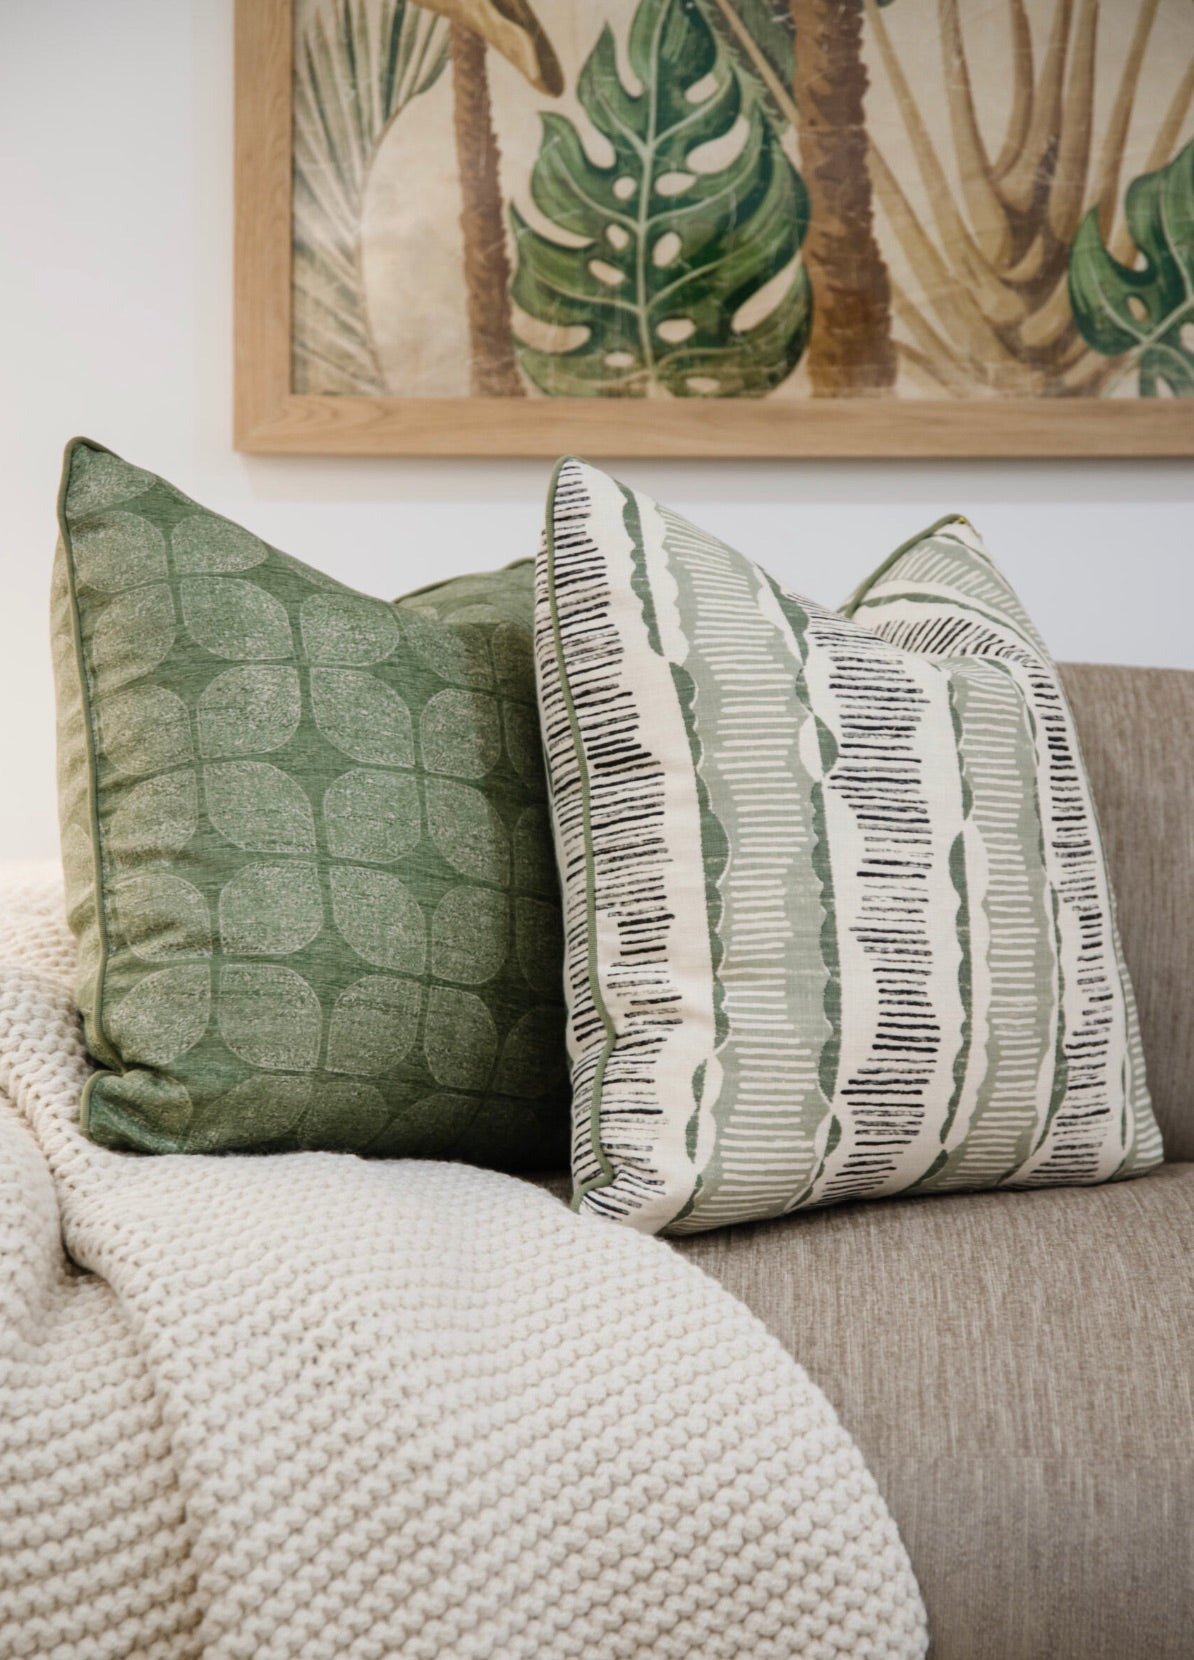 Two Petaluma Moss Pillows rest on a beige sofa with a knitted throw blanket, beneath a framed artwork featuring botanical designs. The attention to detail and use of the finest materials elevate the cozy setting.